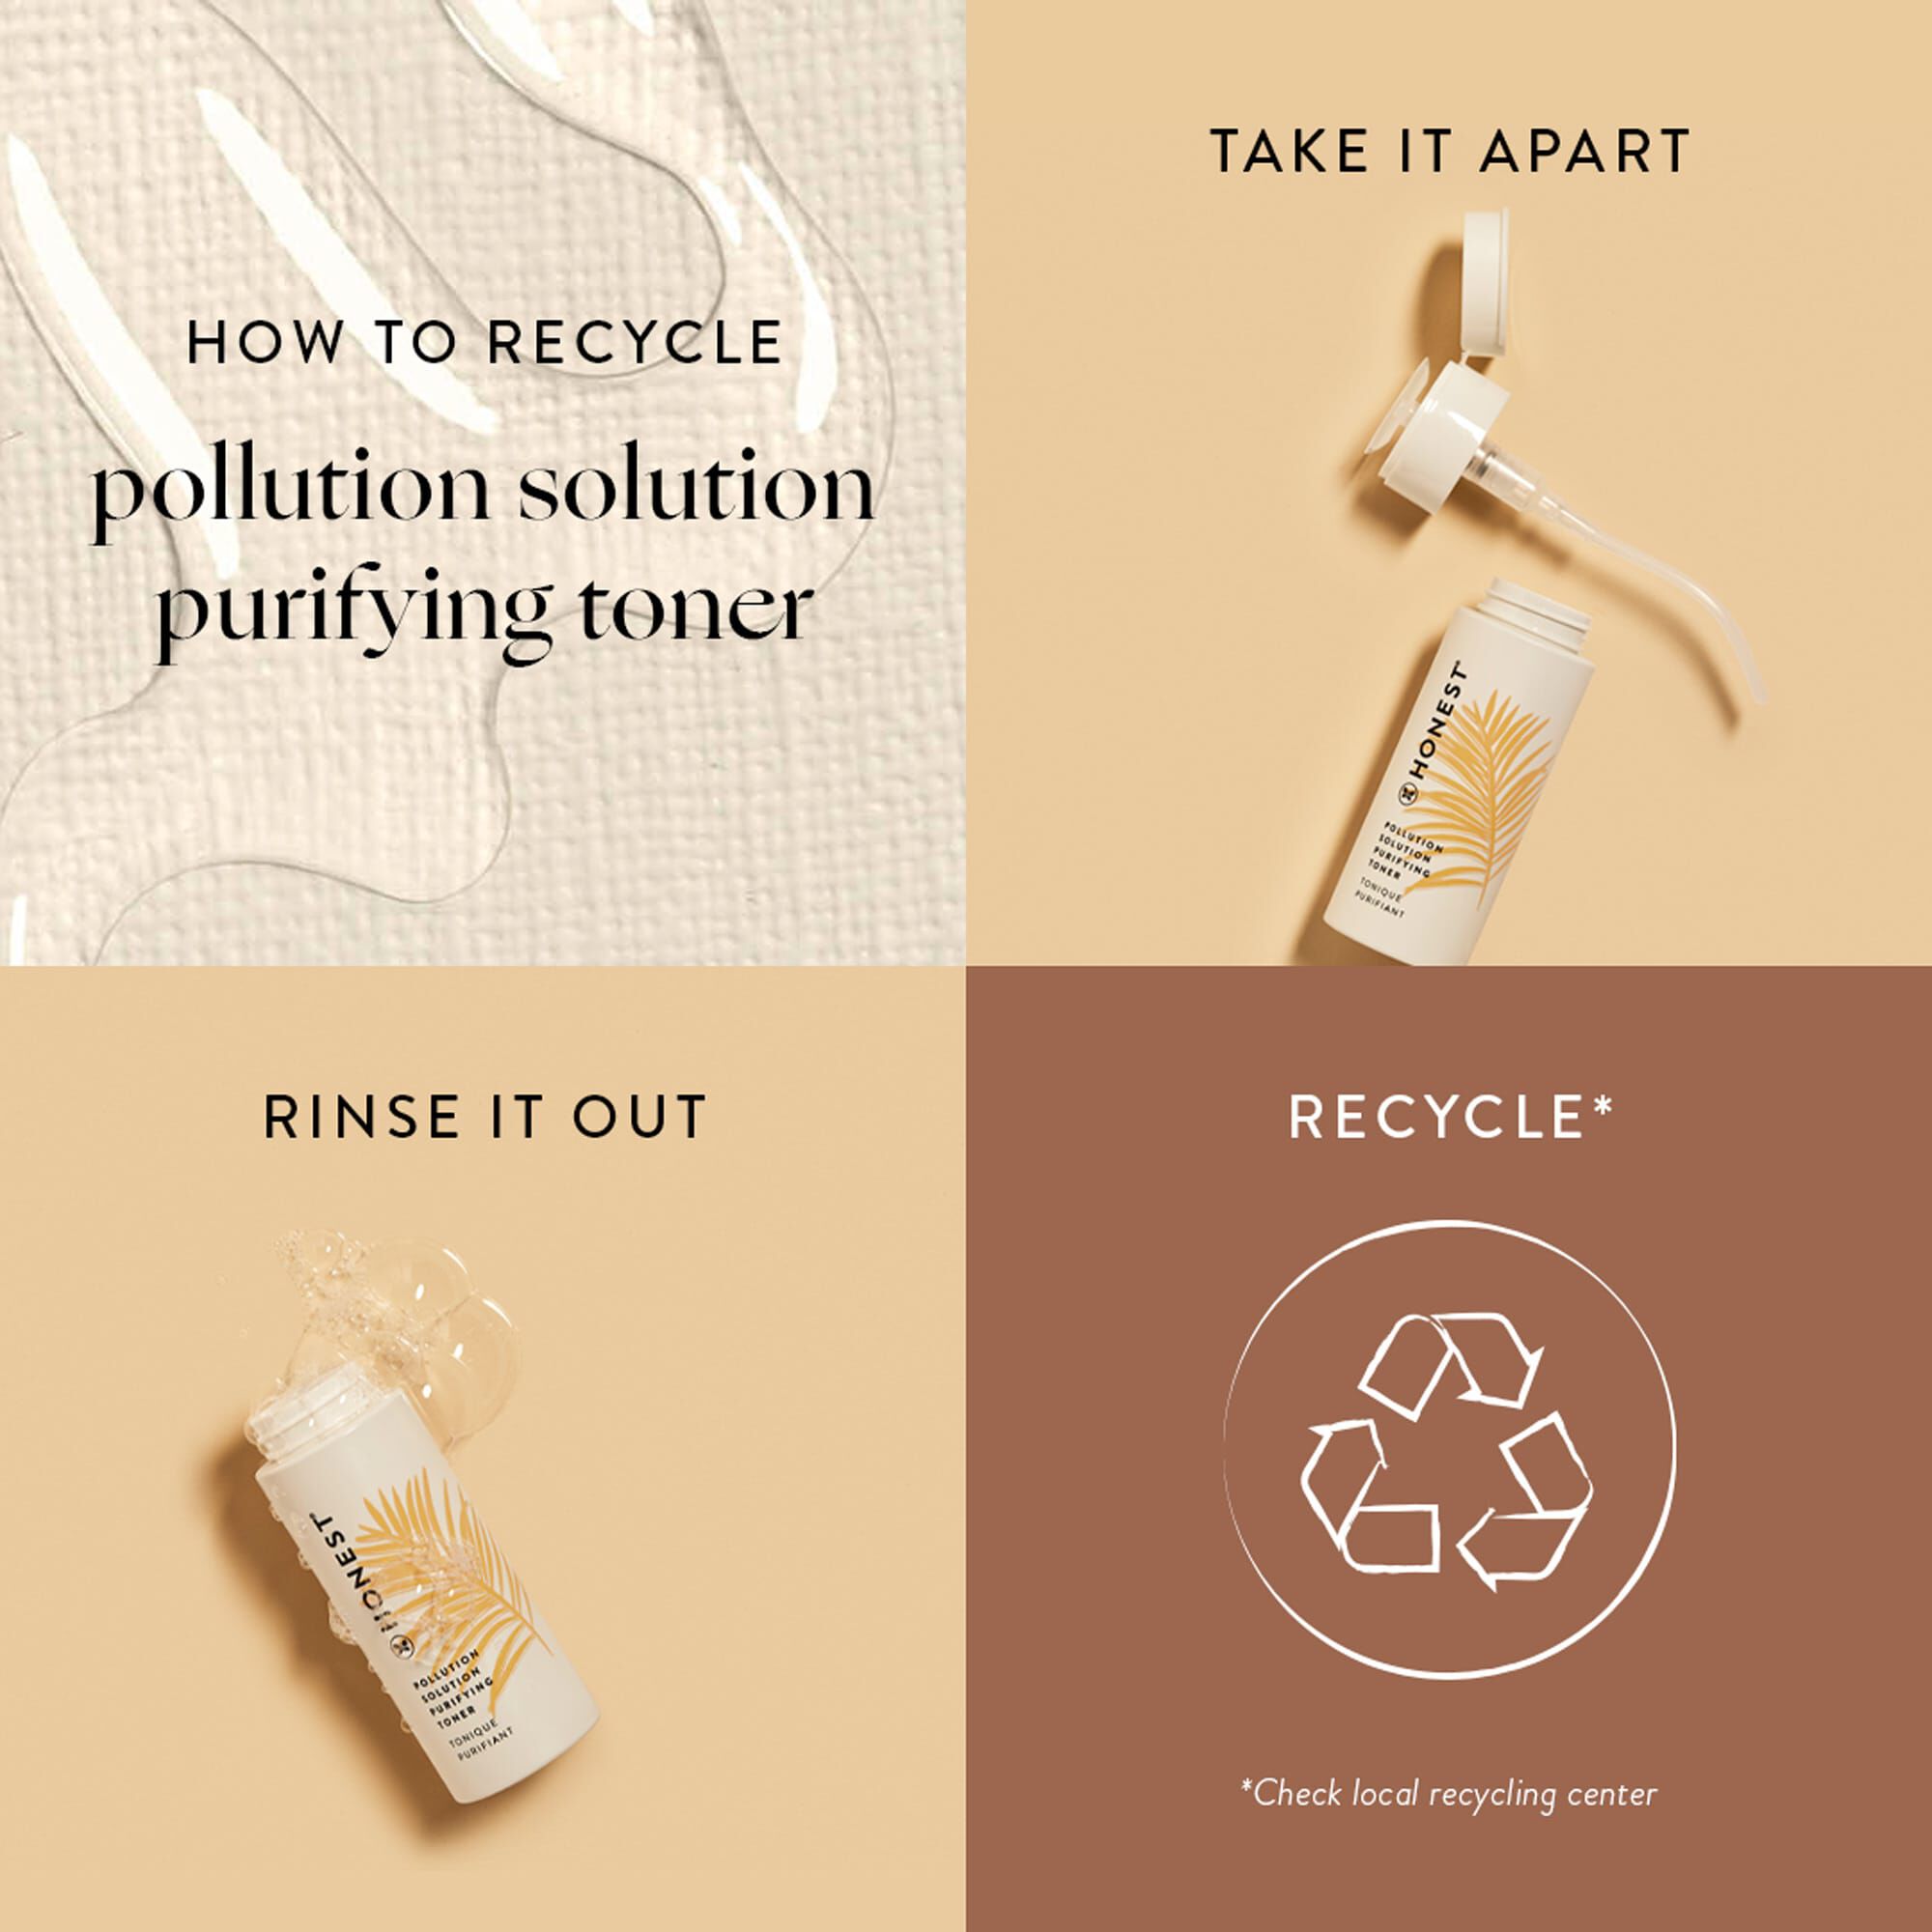 Pollution Solution Purifying Toner